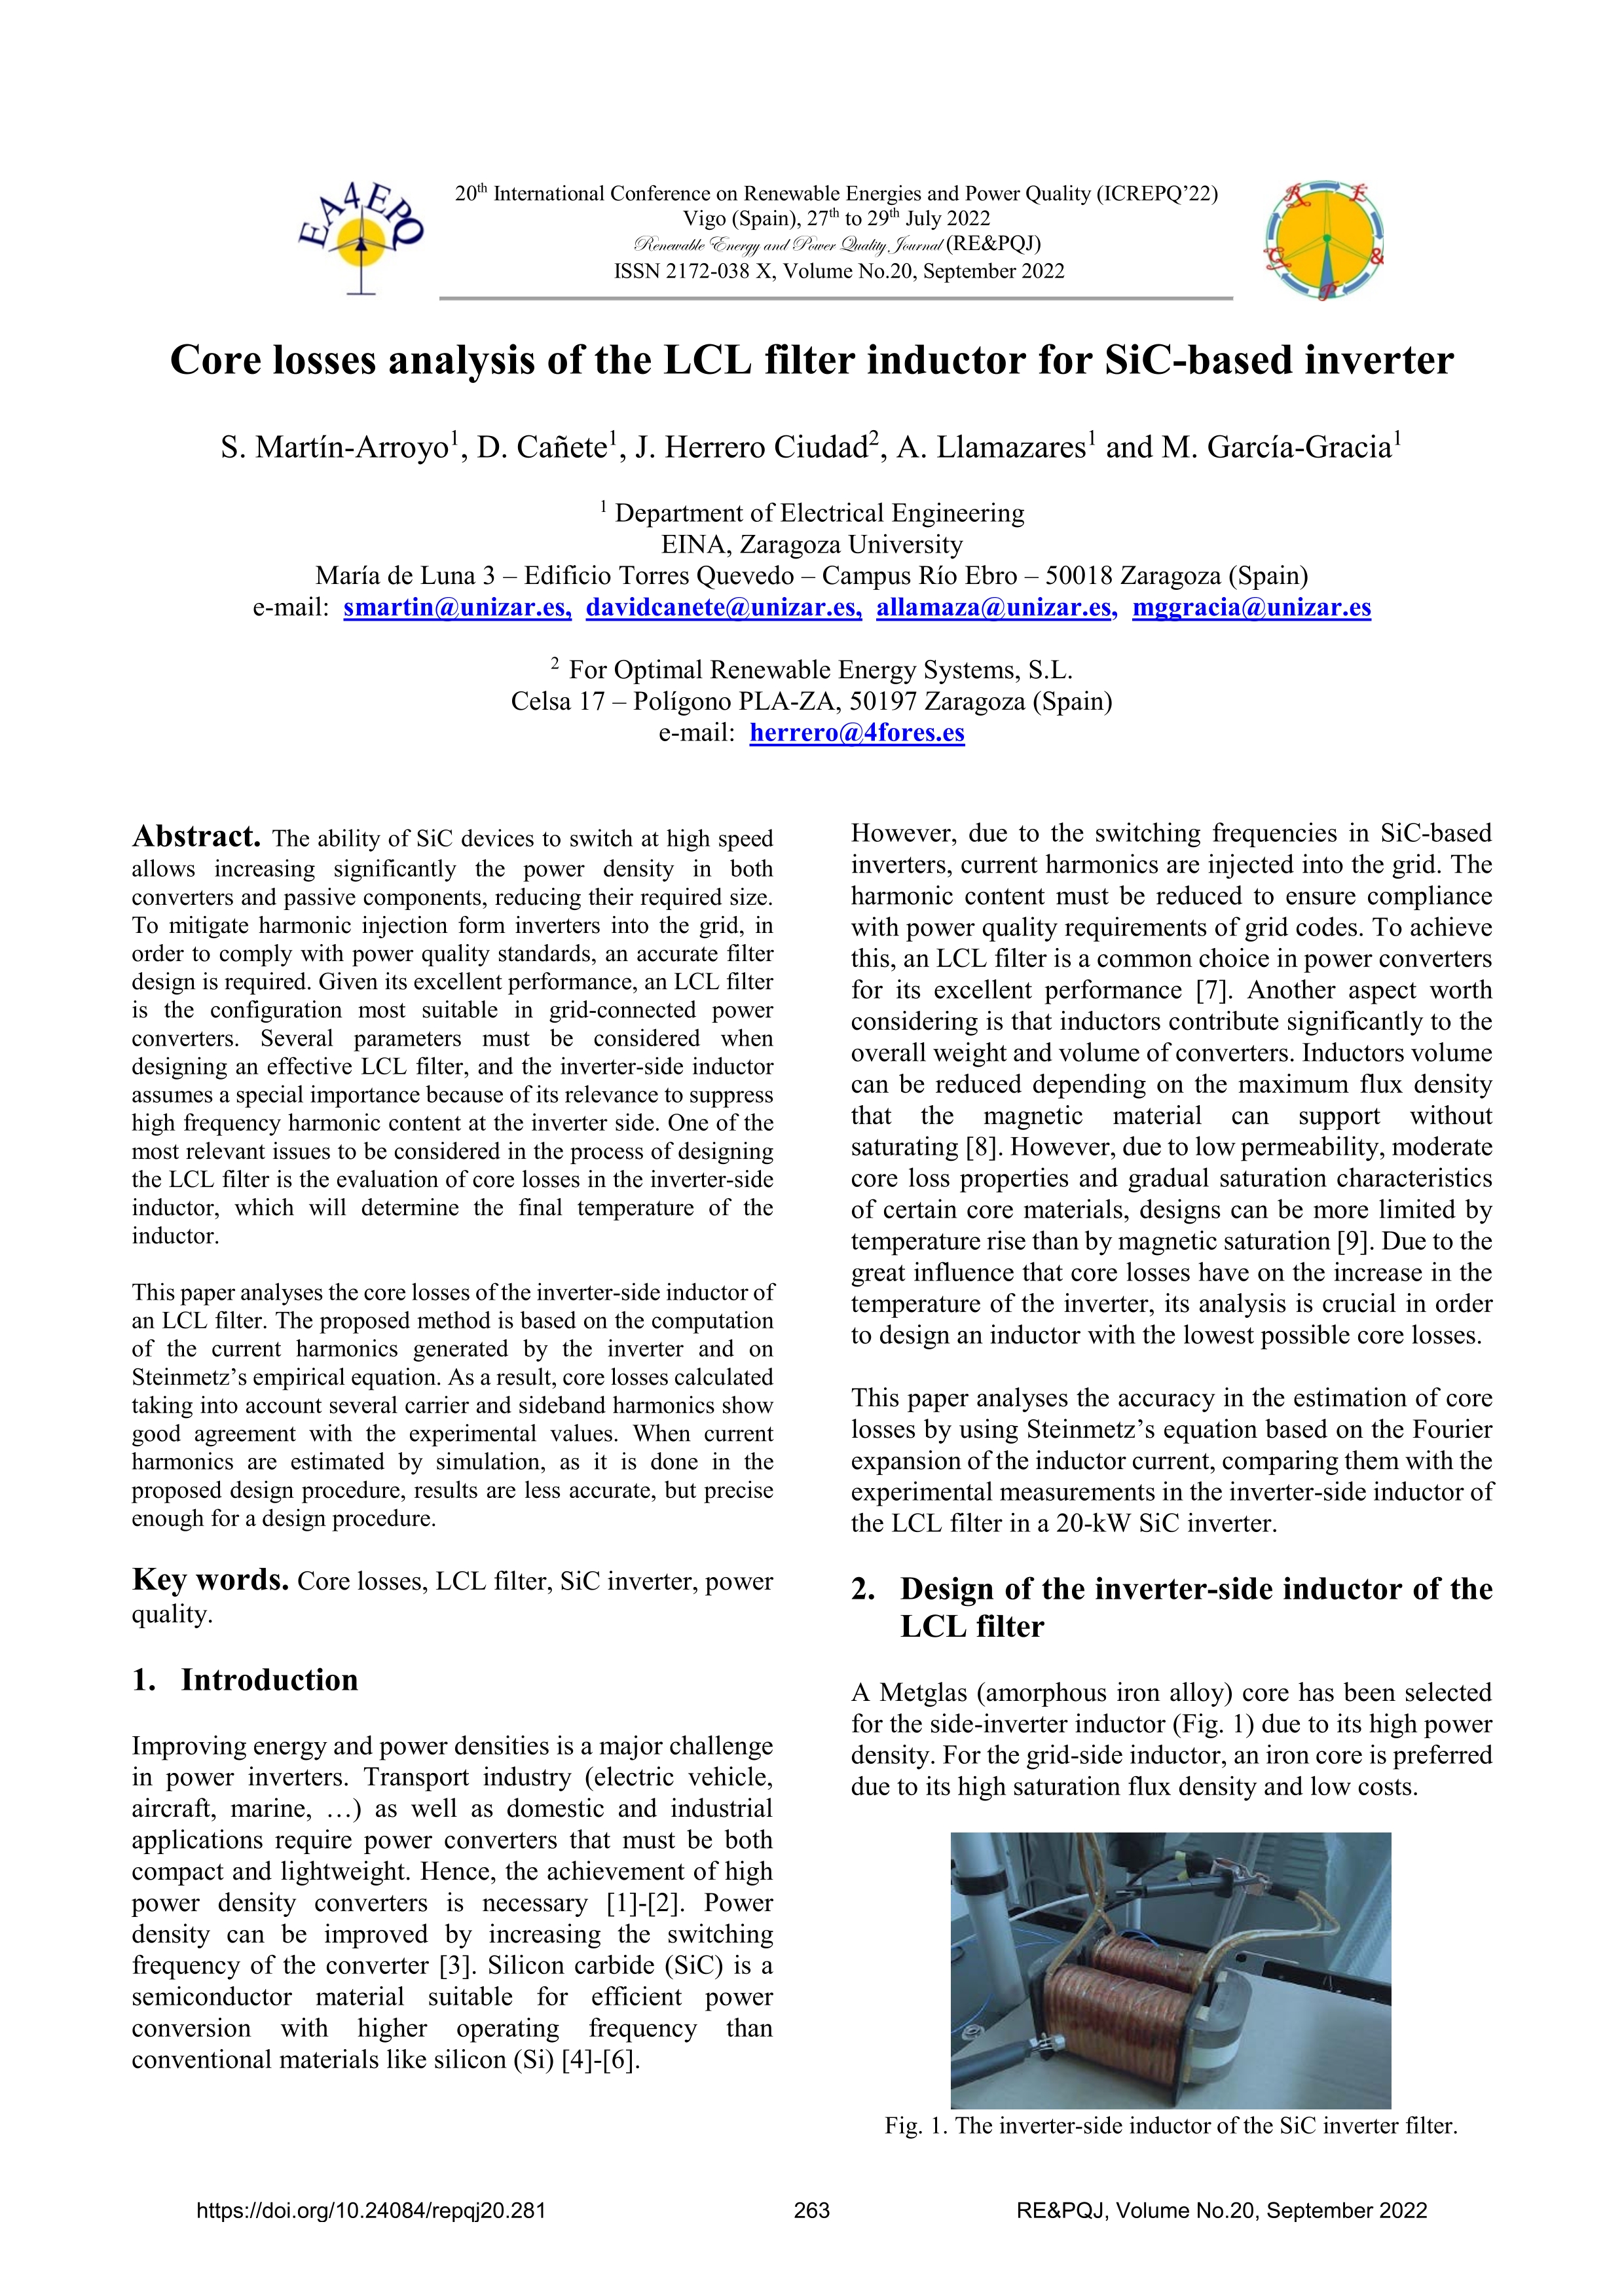 Core losses analysis of the LCL filter inductor for SiC-based inverter